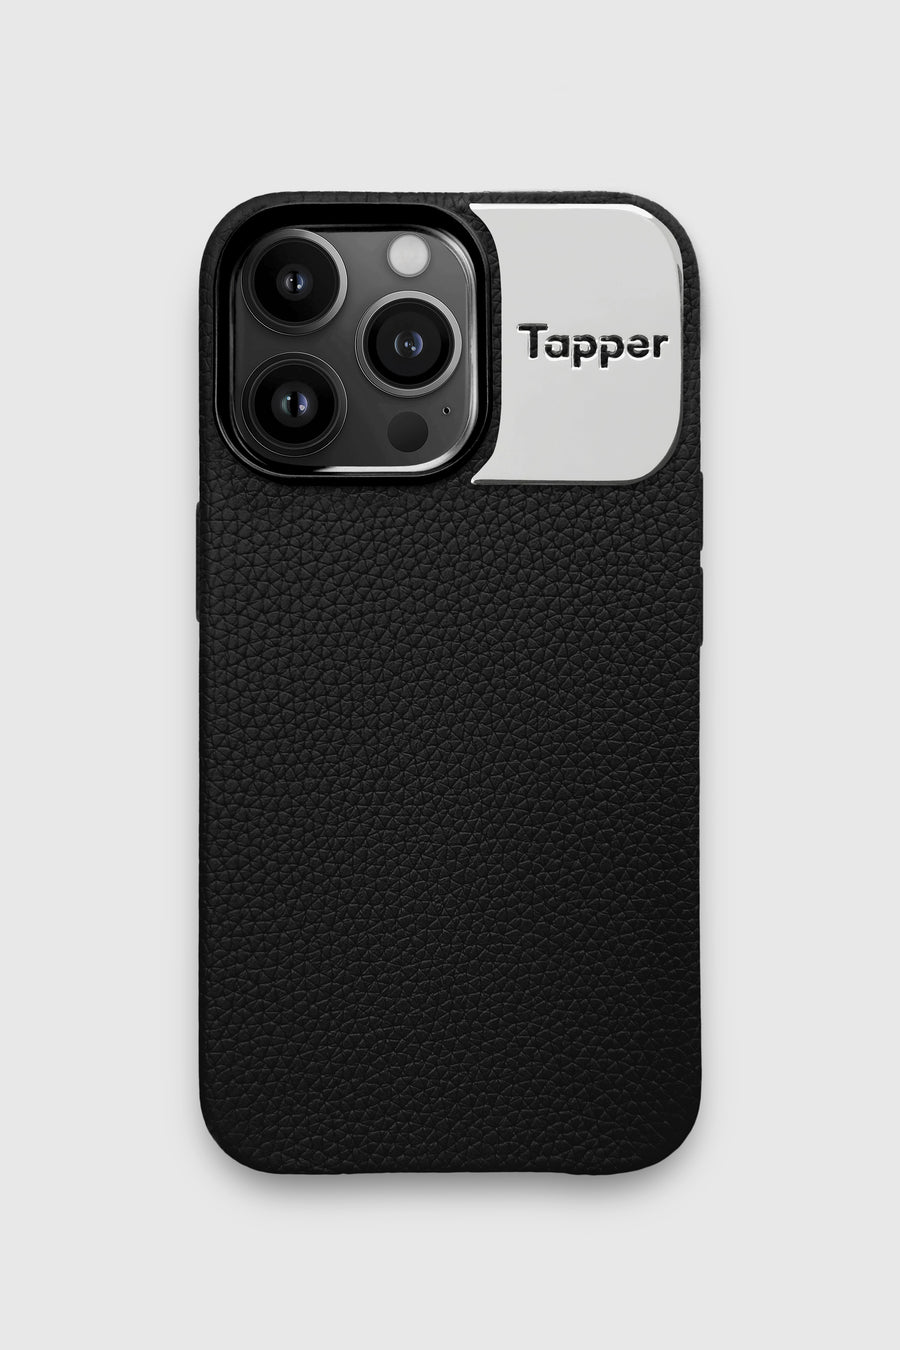 Tapper's luxurious black genuine cow leather iPhone 13 Pro case with MagSafe and a metal logo plate colored in silver that protects and elevates the look of your iPhone 13 Pro. The next must-have high end protective Apple iPhone accessory in real leather and metal details.  Designed in Sweden by Tapper. Free Express Shipping at gettapper.com